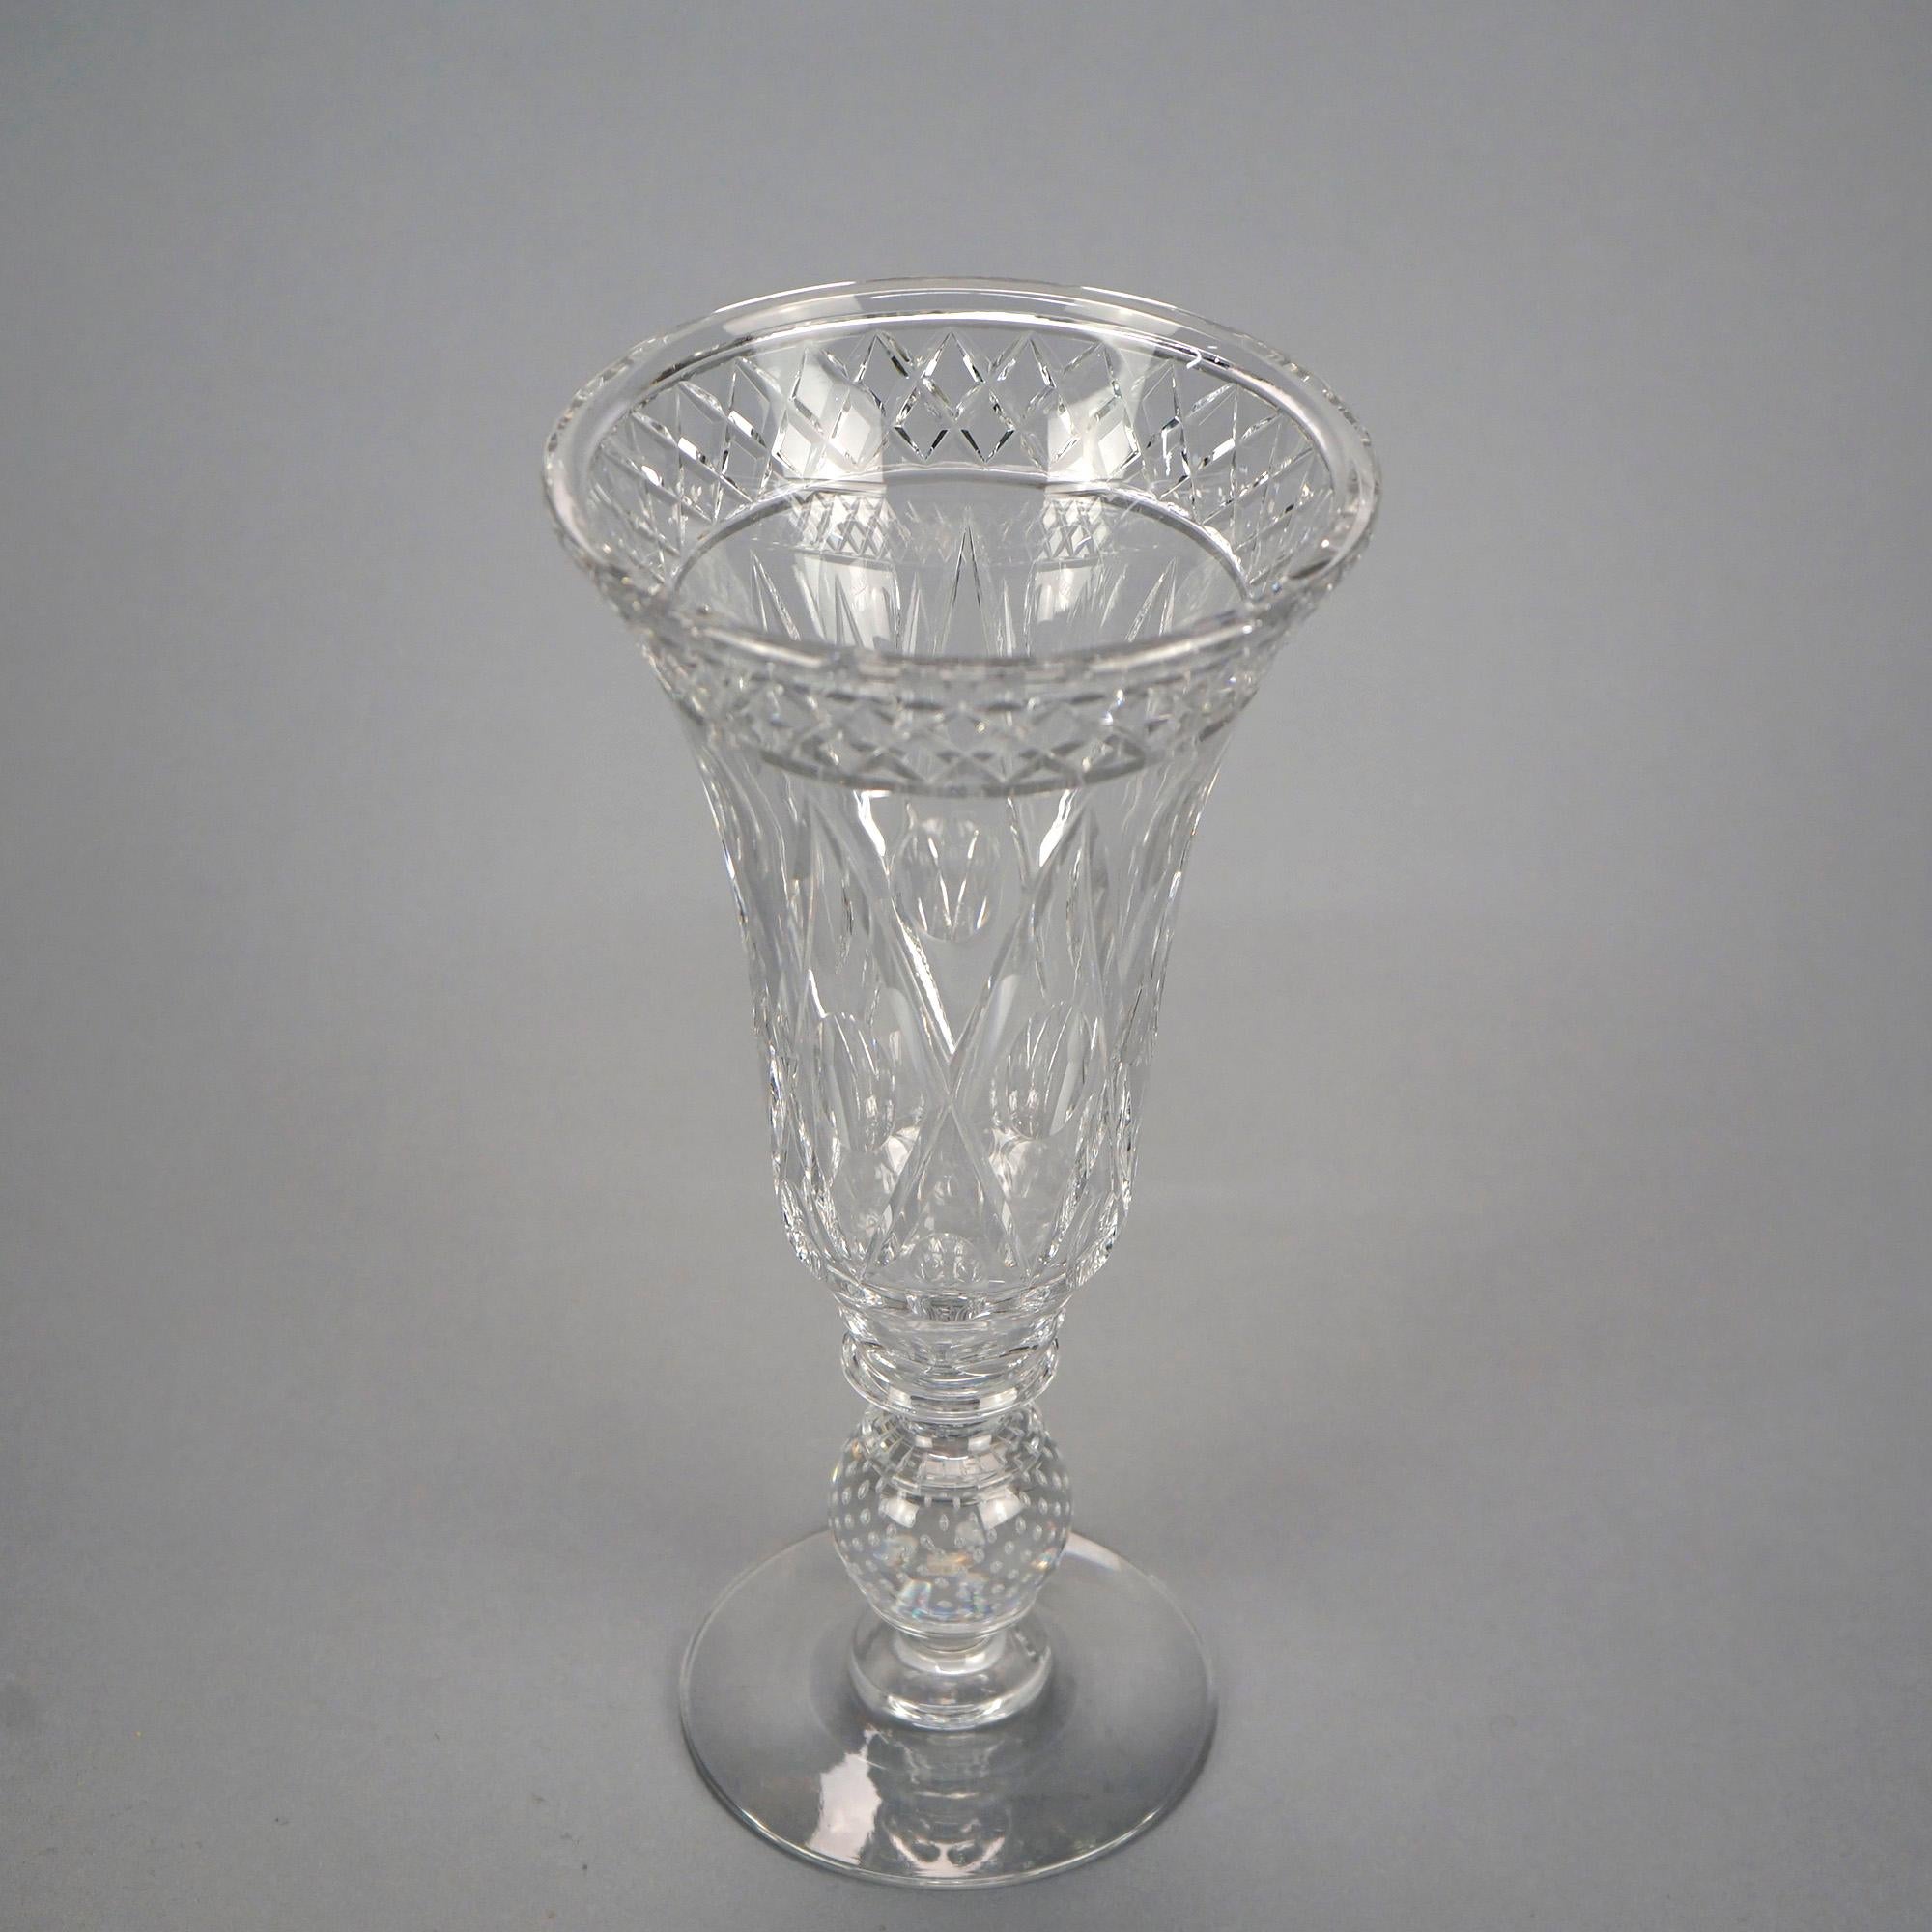 American Antique Pair of Pairpoint Cut Glass Bubble Vases, Circa 1920